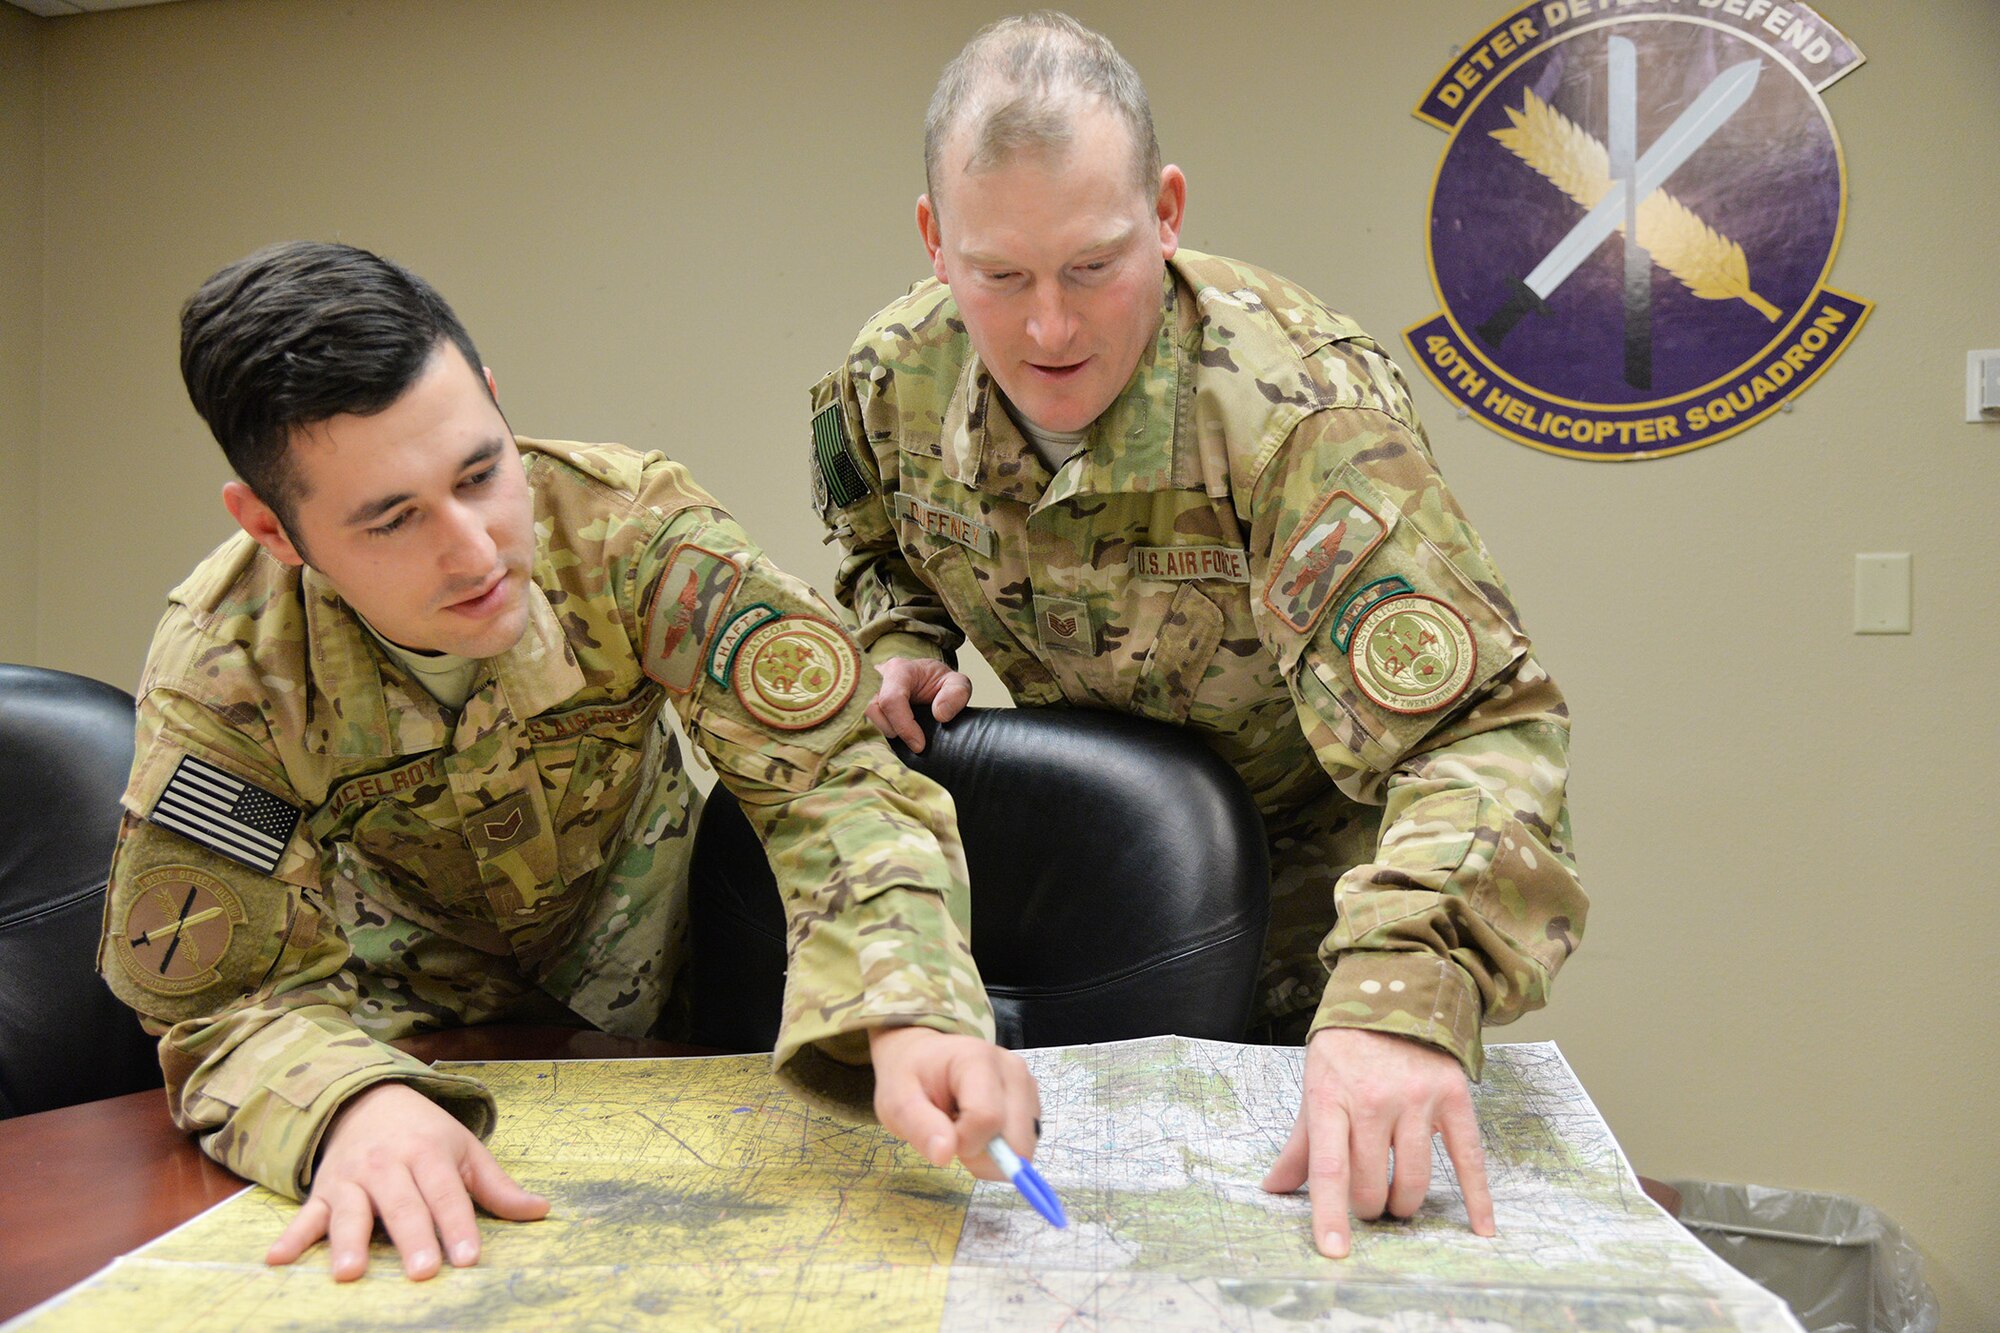 Staff Sgt. Eric McElroy, left, and Tech. Sgt. Michael Duffney, 40th Helicopter Squadron flight engineers, review a land map Nov. 2, 2016, at Malmstrom Air Force Base, Mont. Flight engineers assist pilots in flying the aircraft and ensuring the helicopter has enough fuel and weight to safely and successfully execute a mission. (U.S. Air Force photo/Airman 1st Class Daniel Brosam)